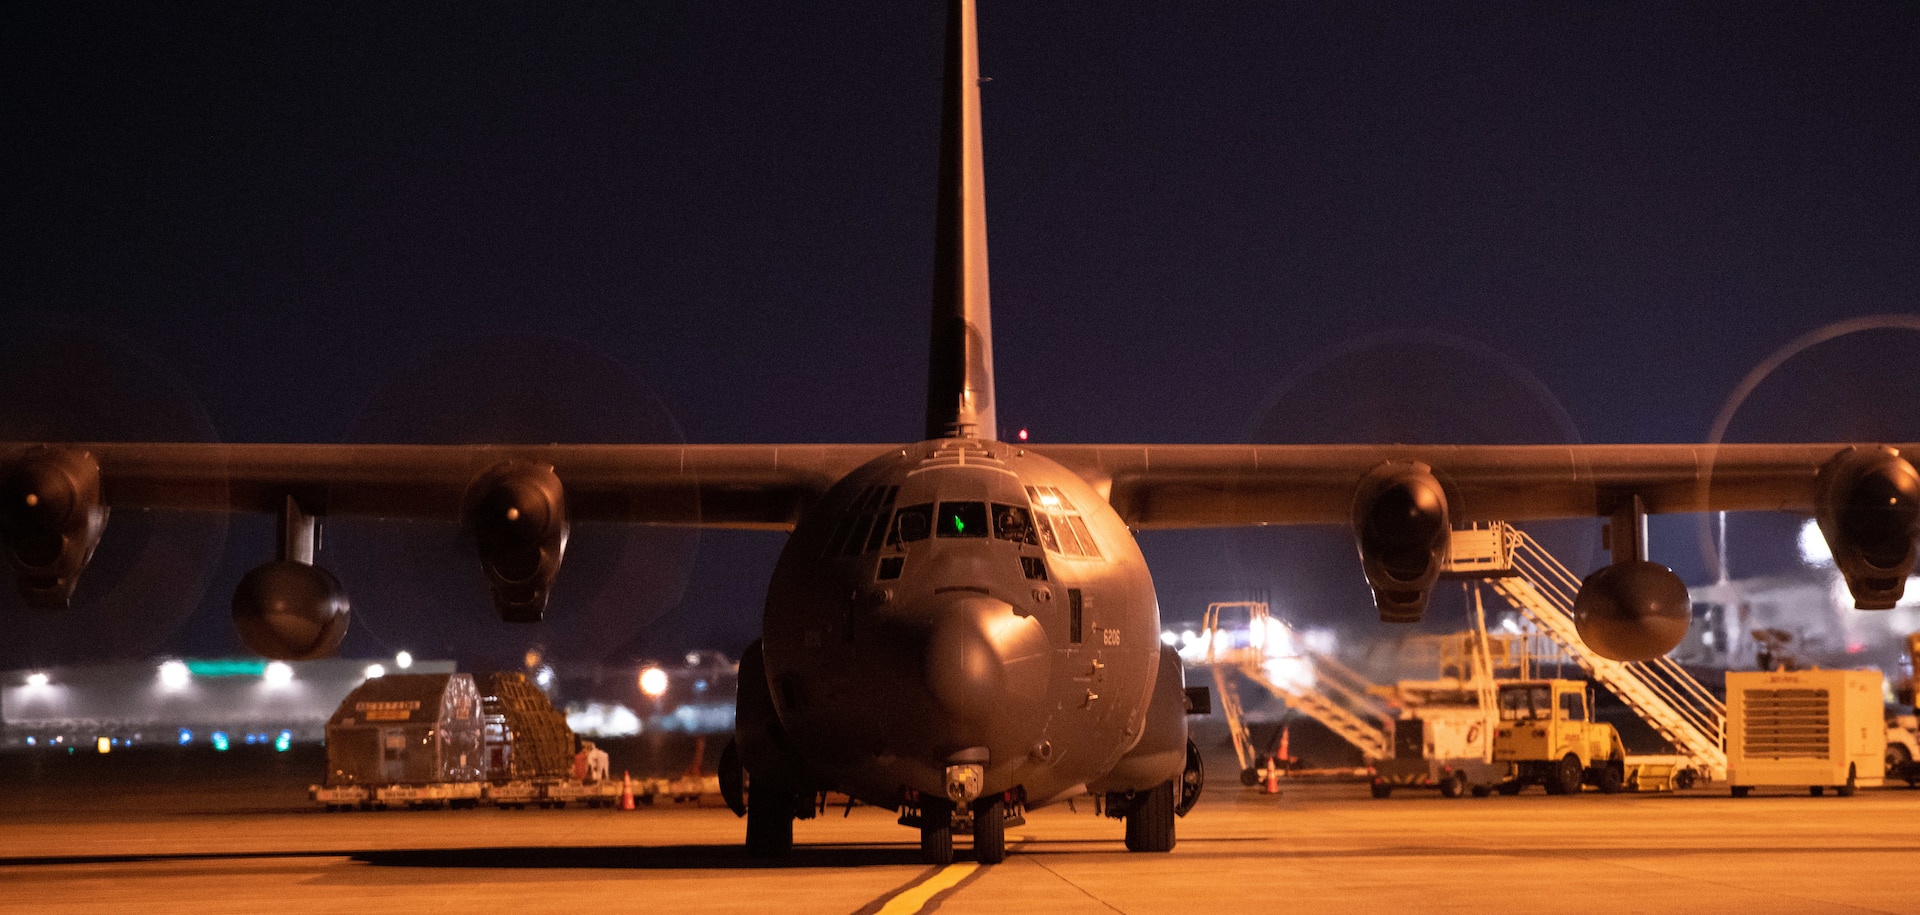 An MC-130J Commando II arrives at the 193rd Special Operations Wing at Middletown, Pennsylvania, Feb. 2, 2023. The arrival of the aircraft marks a symbolic beginning to the unit's new primary mission as the first and currently only Air National Guard unit to operate the Commando II.